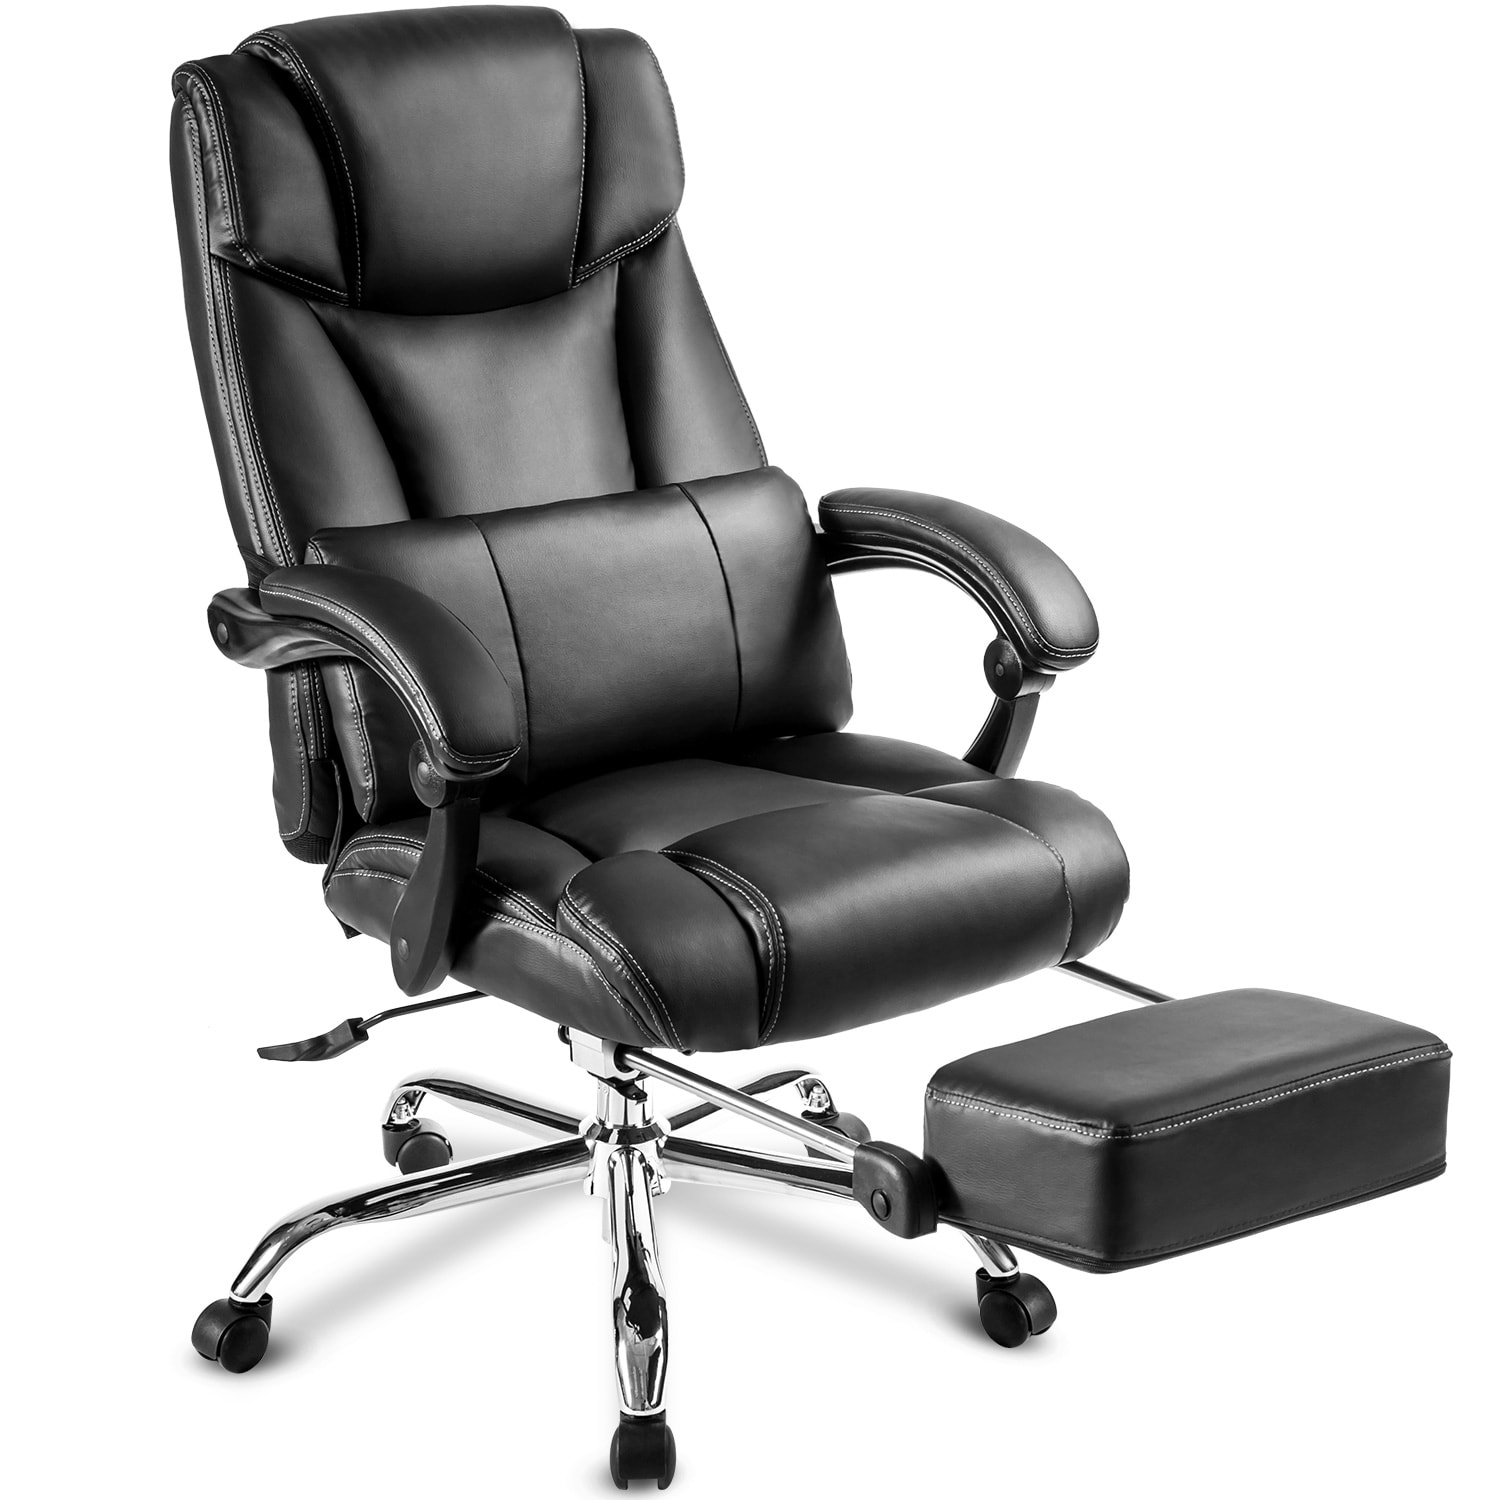 https://ak1.ostkcdn.com/images/products/is/images/direct/3ae8306e67b5b85b188c6b26061dd0d665f75c53/Office-Desk-Swivel-Ergonomic-Chair-Mesh-Stools-Lounge-Chairs-High-Back-for-Office-Double-Padded--Support-Cushion-and-Footrest.jpg